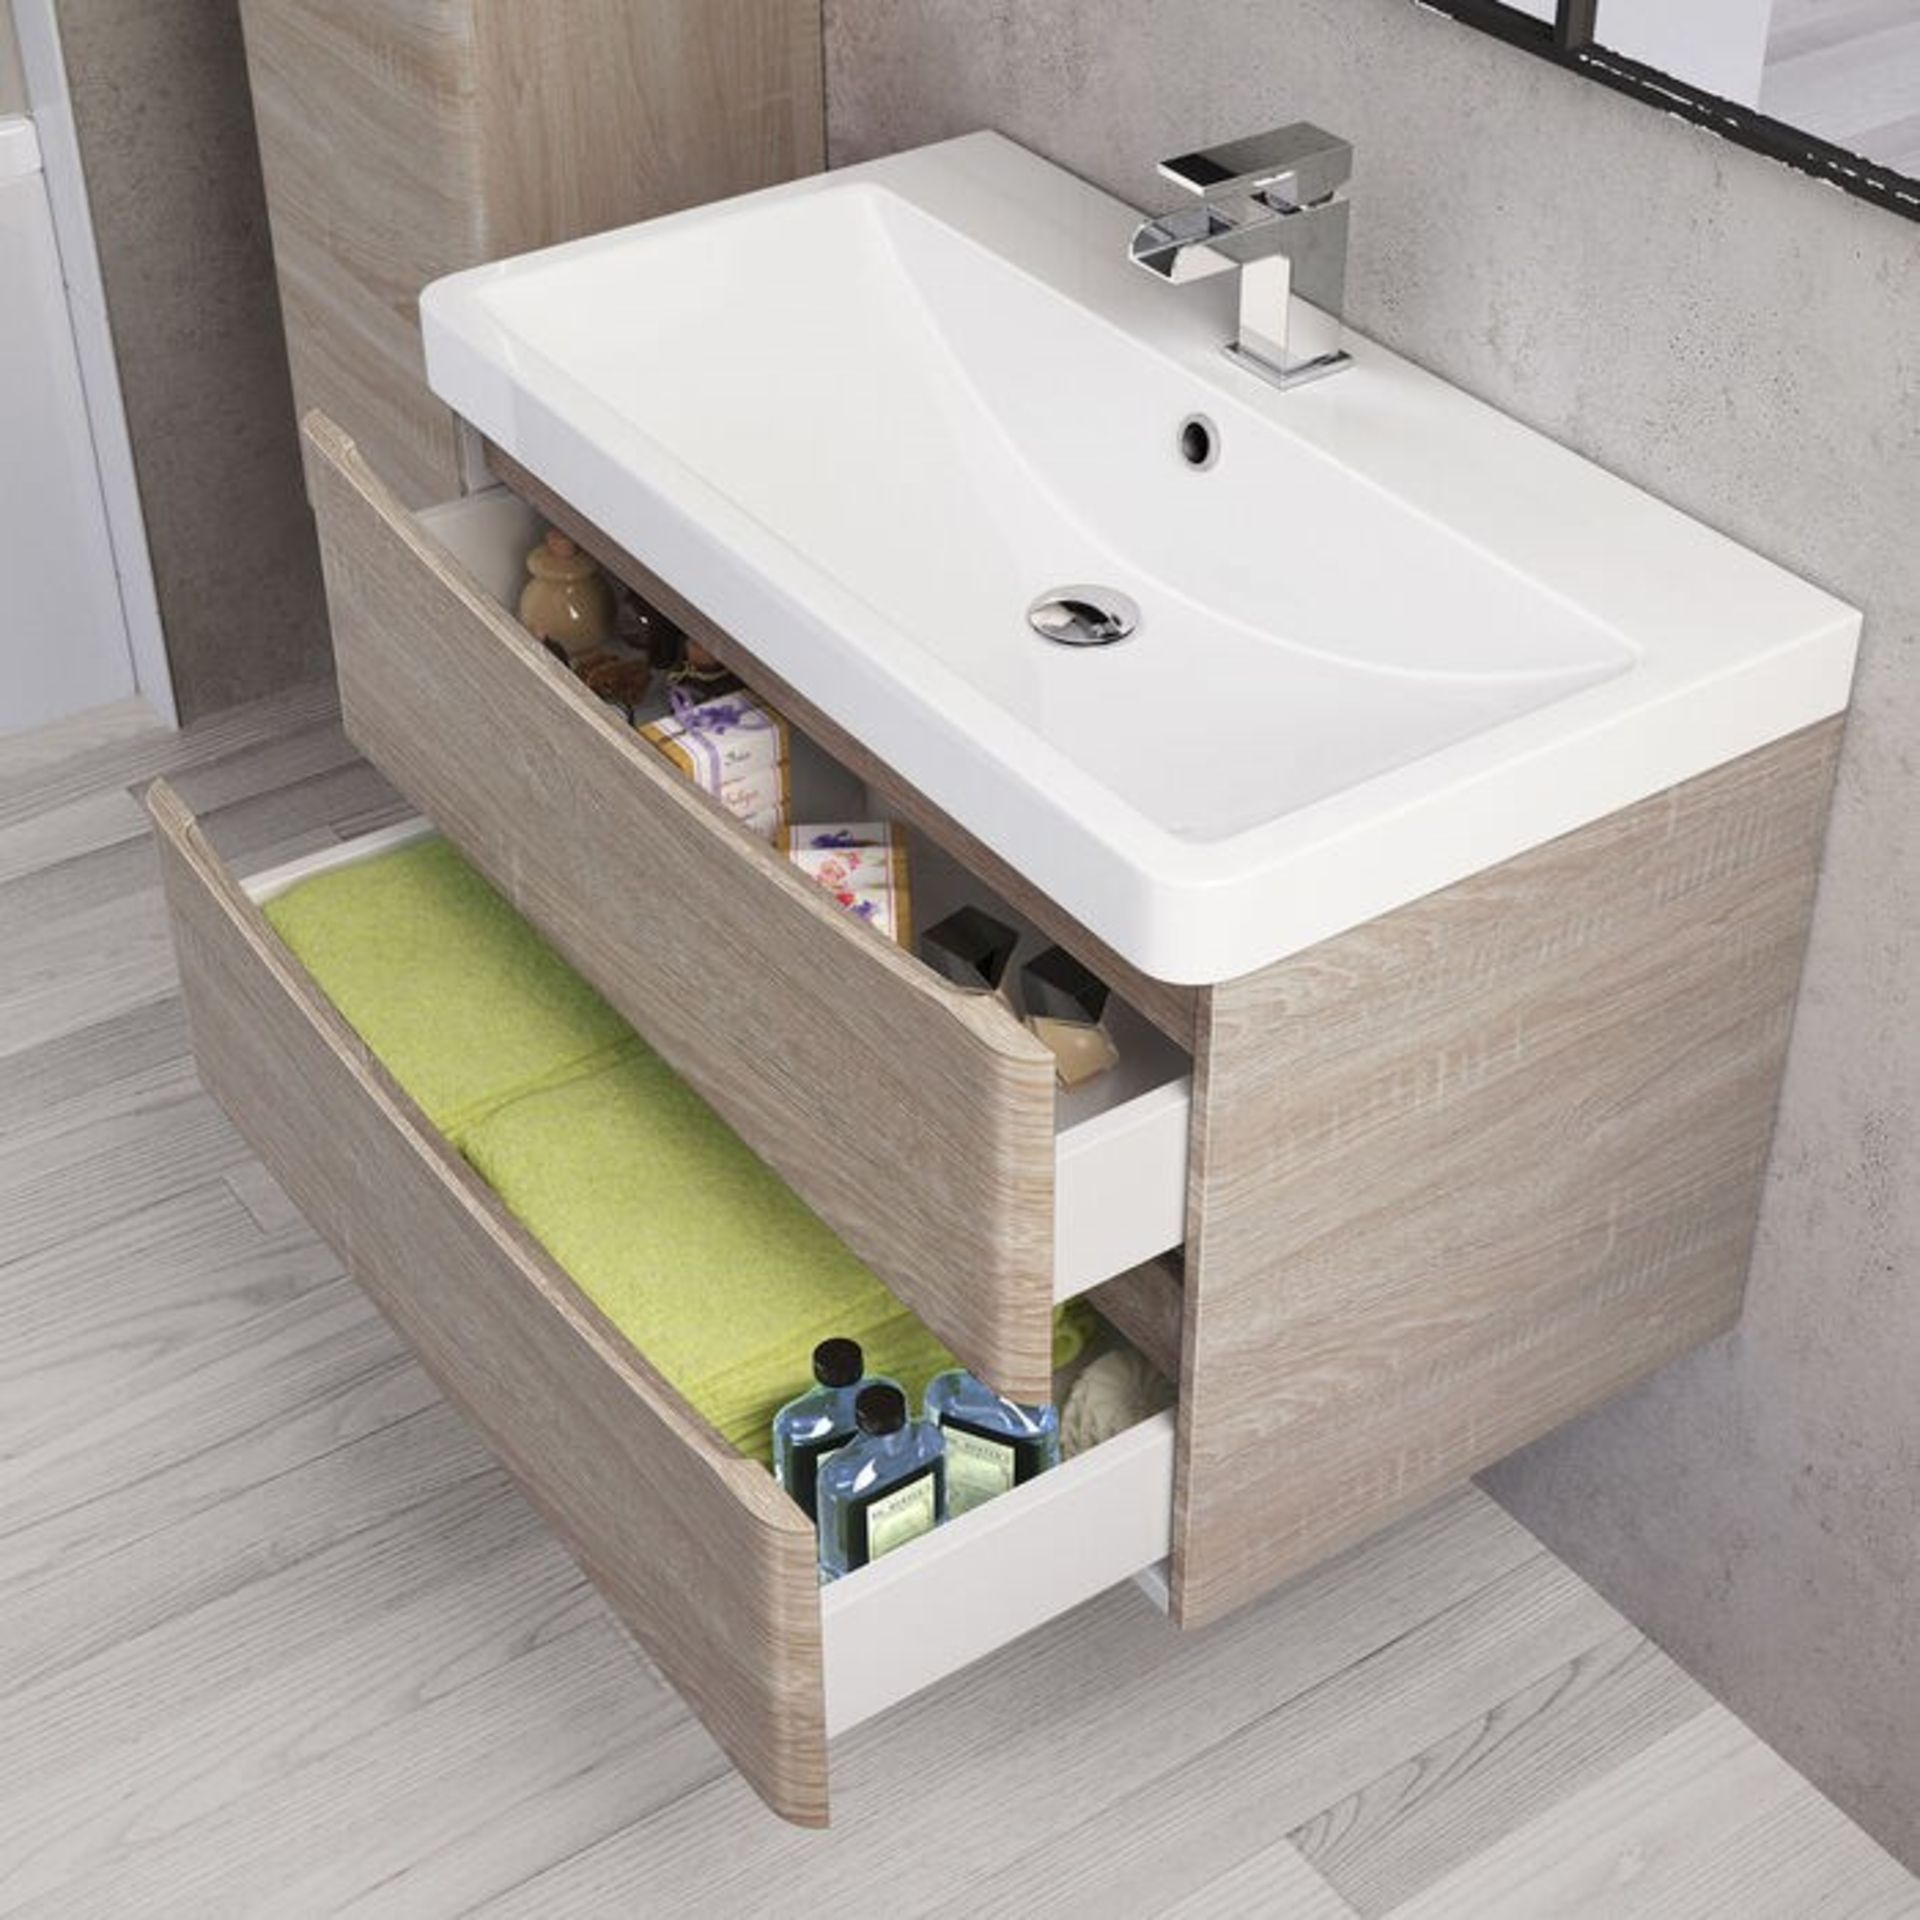 Brand New 800mm Austin II Light Oak Effect Built In Sink Drawer Unit - Wall Hung. RRP £849.99.Comes - Image 2 of 3